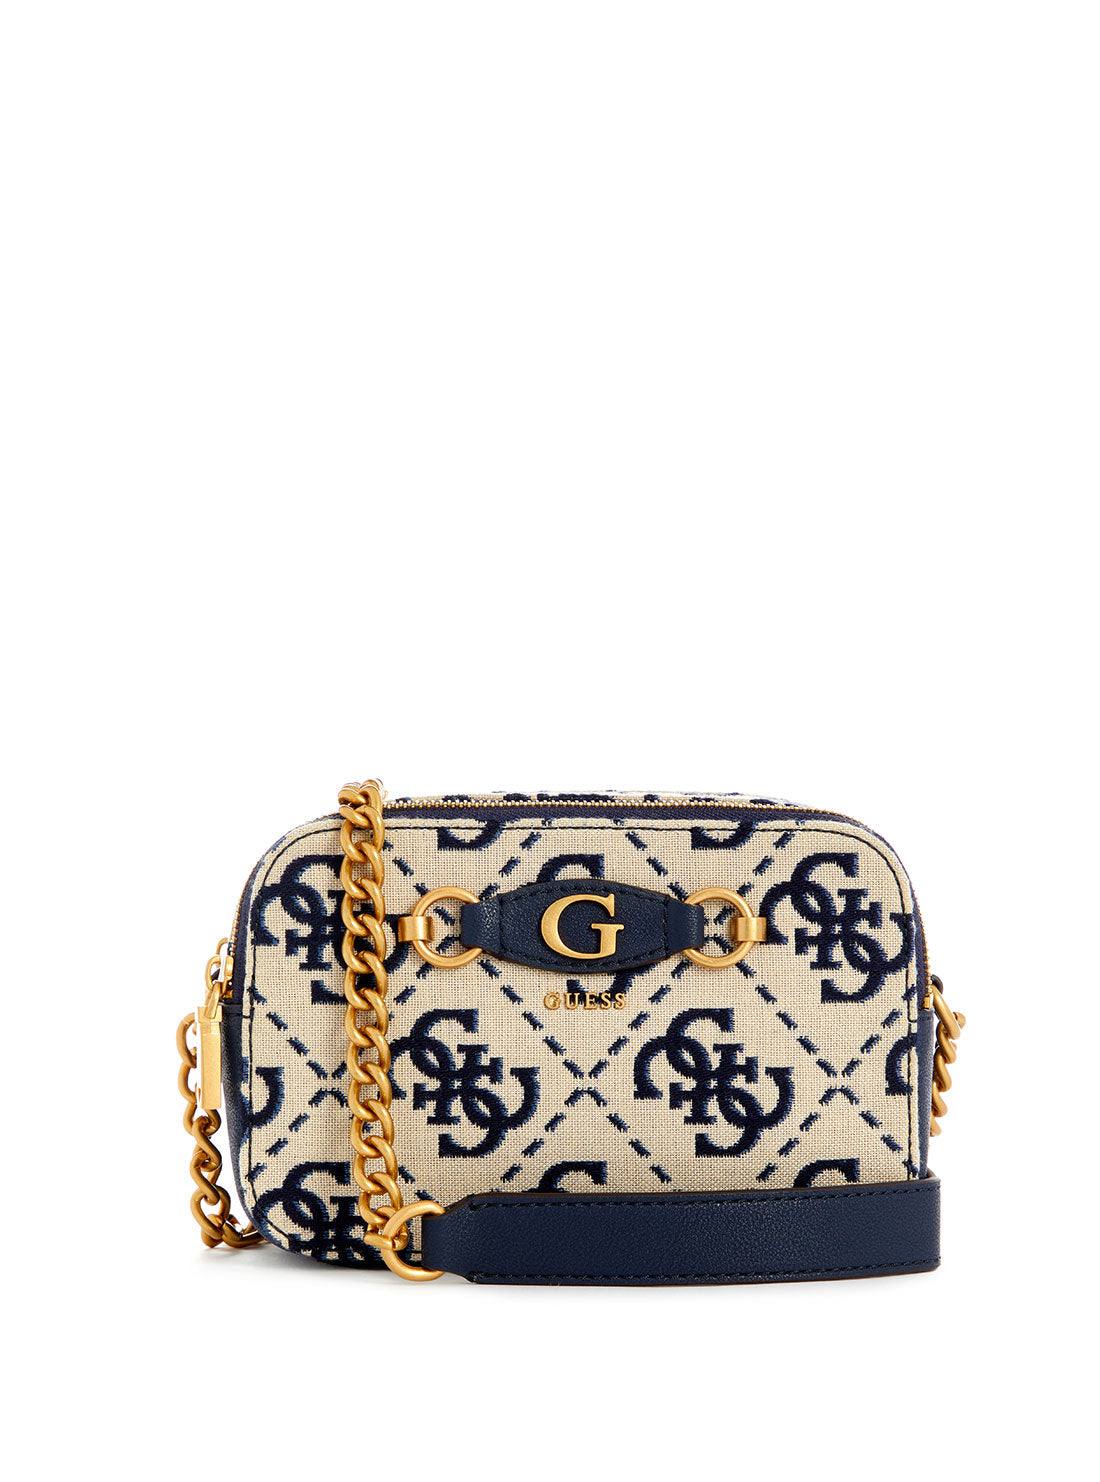 GUESS Blue Navy Logo Izzy Camera Bag front view